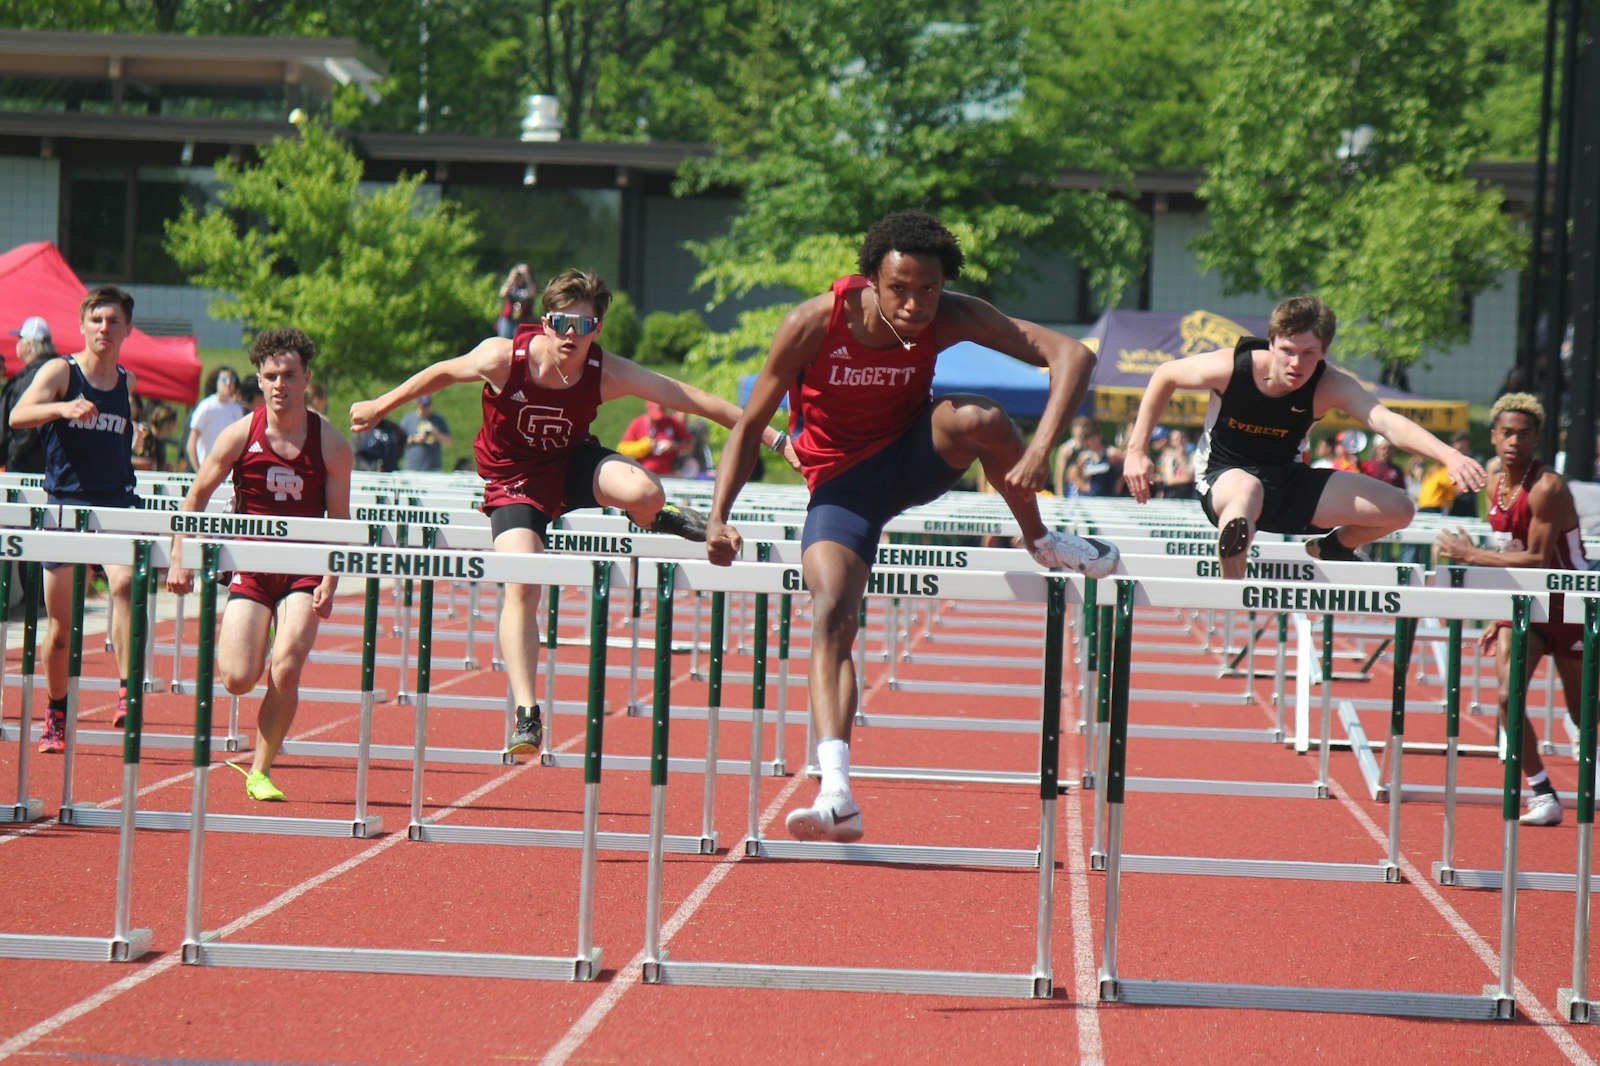 Grosse Pointe Woods University-Liggett’s Taurian Dorty won both hurdle races for the Knights. He was also on the team’s winning 4x100 relay.